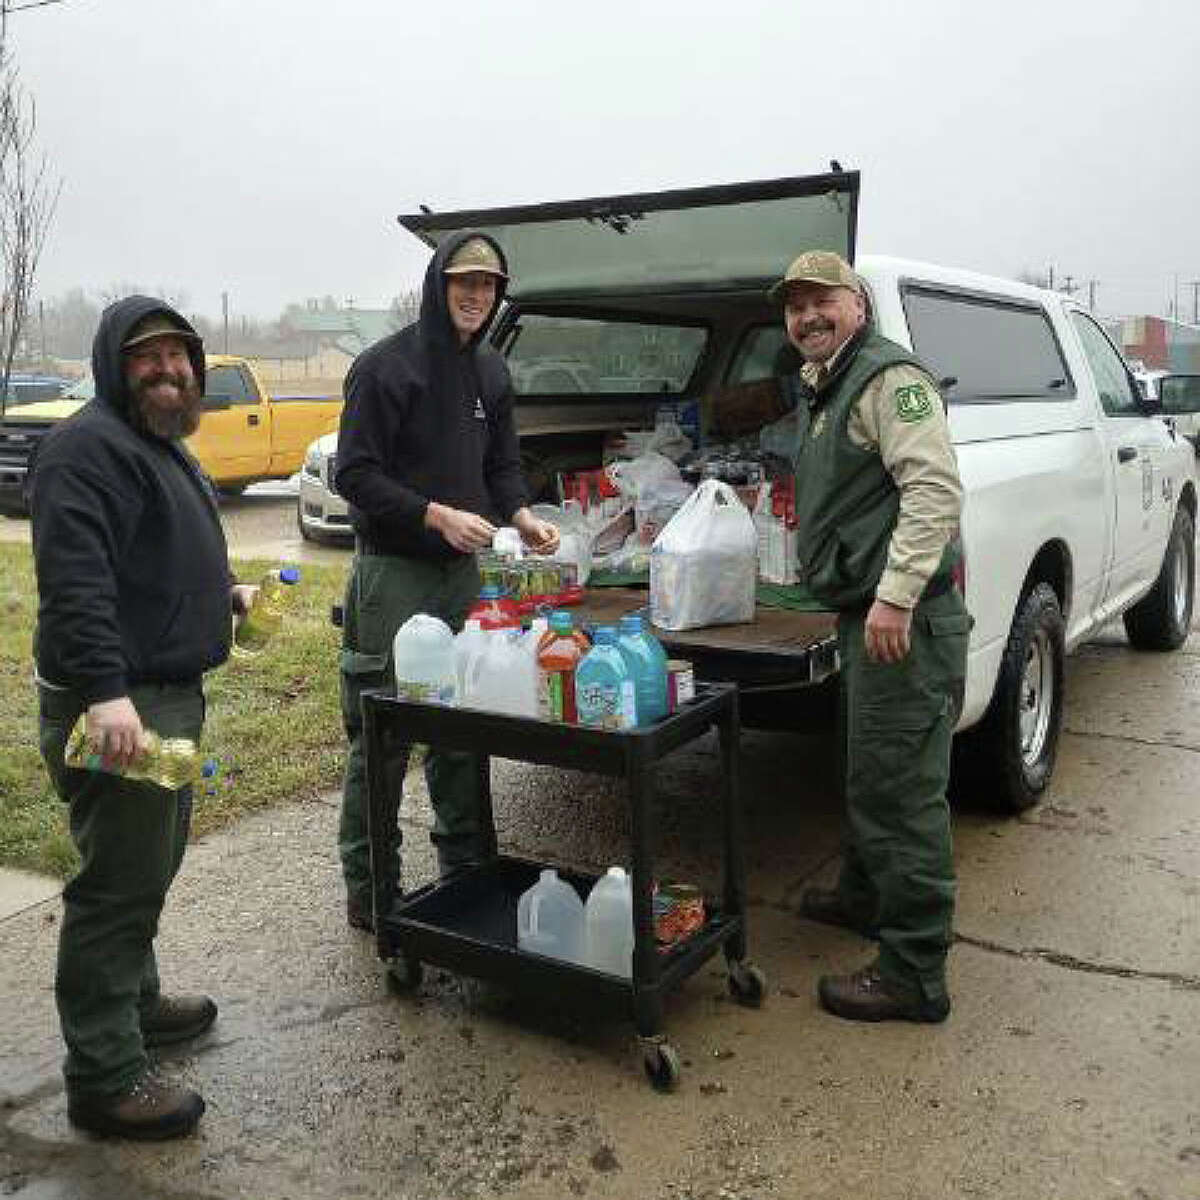 A polar plunge food drive has become an annual tradition and way for members of the Huron-Manistee National Forest Service to give to their communities. Above, staff with the Baldwin-White Cloud Ranger District dropped off food items to the Bread of Life pantry.